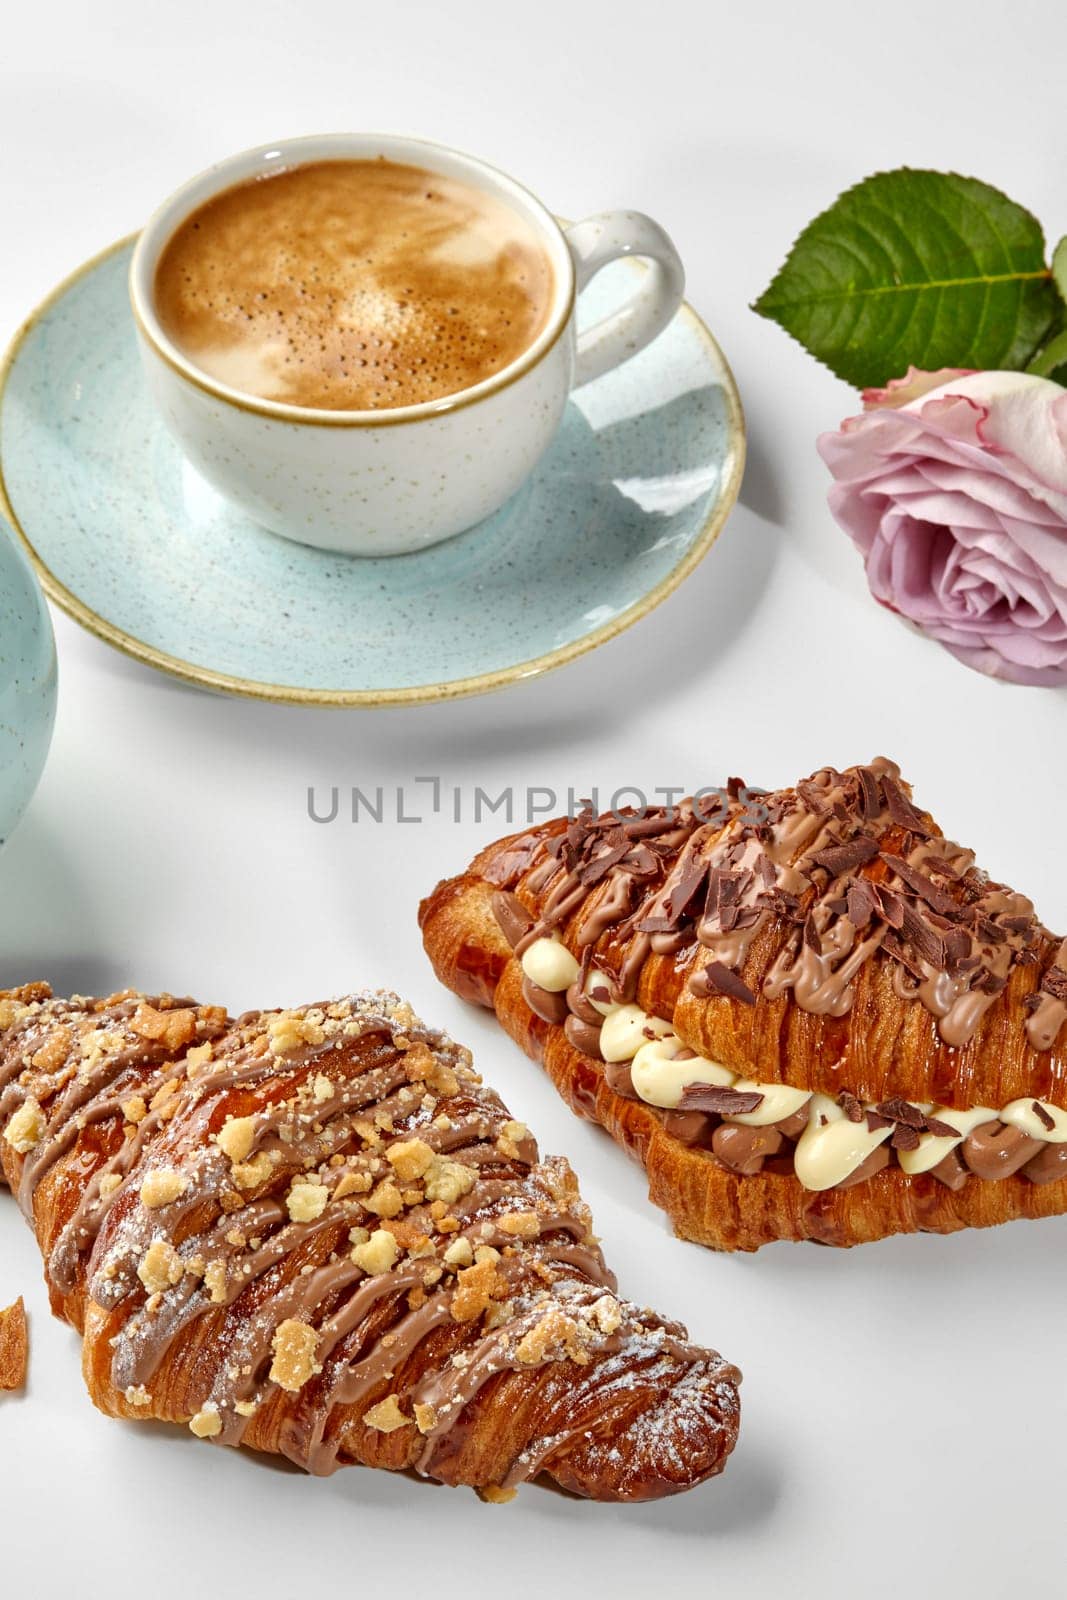 Croissants filled with dark and white chocolate custard garnished with shavings and caramelized crumbs, served in romantic setting with freshly brewed cup of espresso and blooming rose